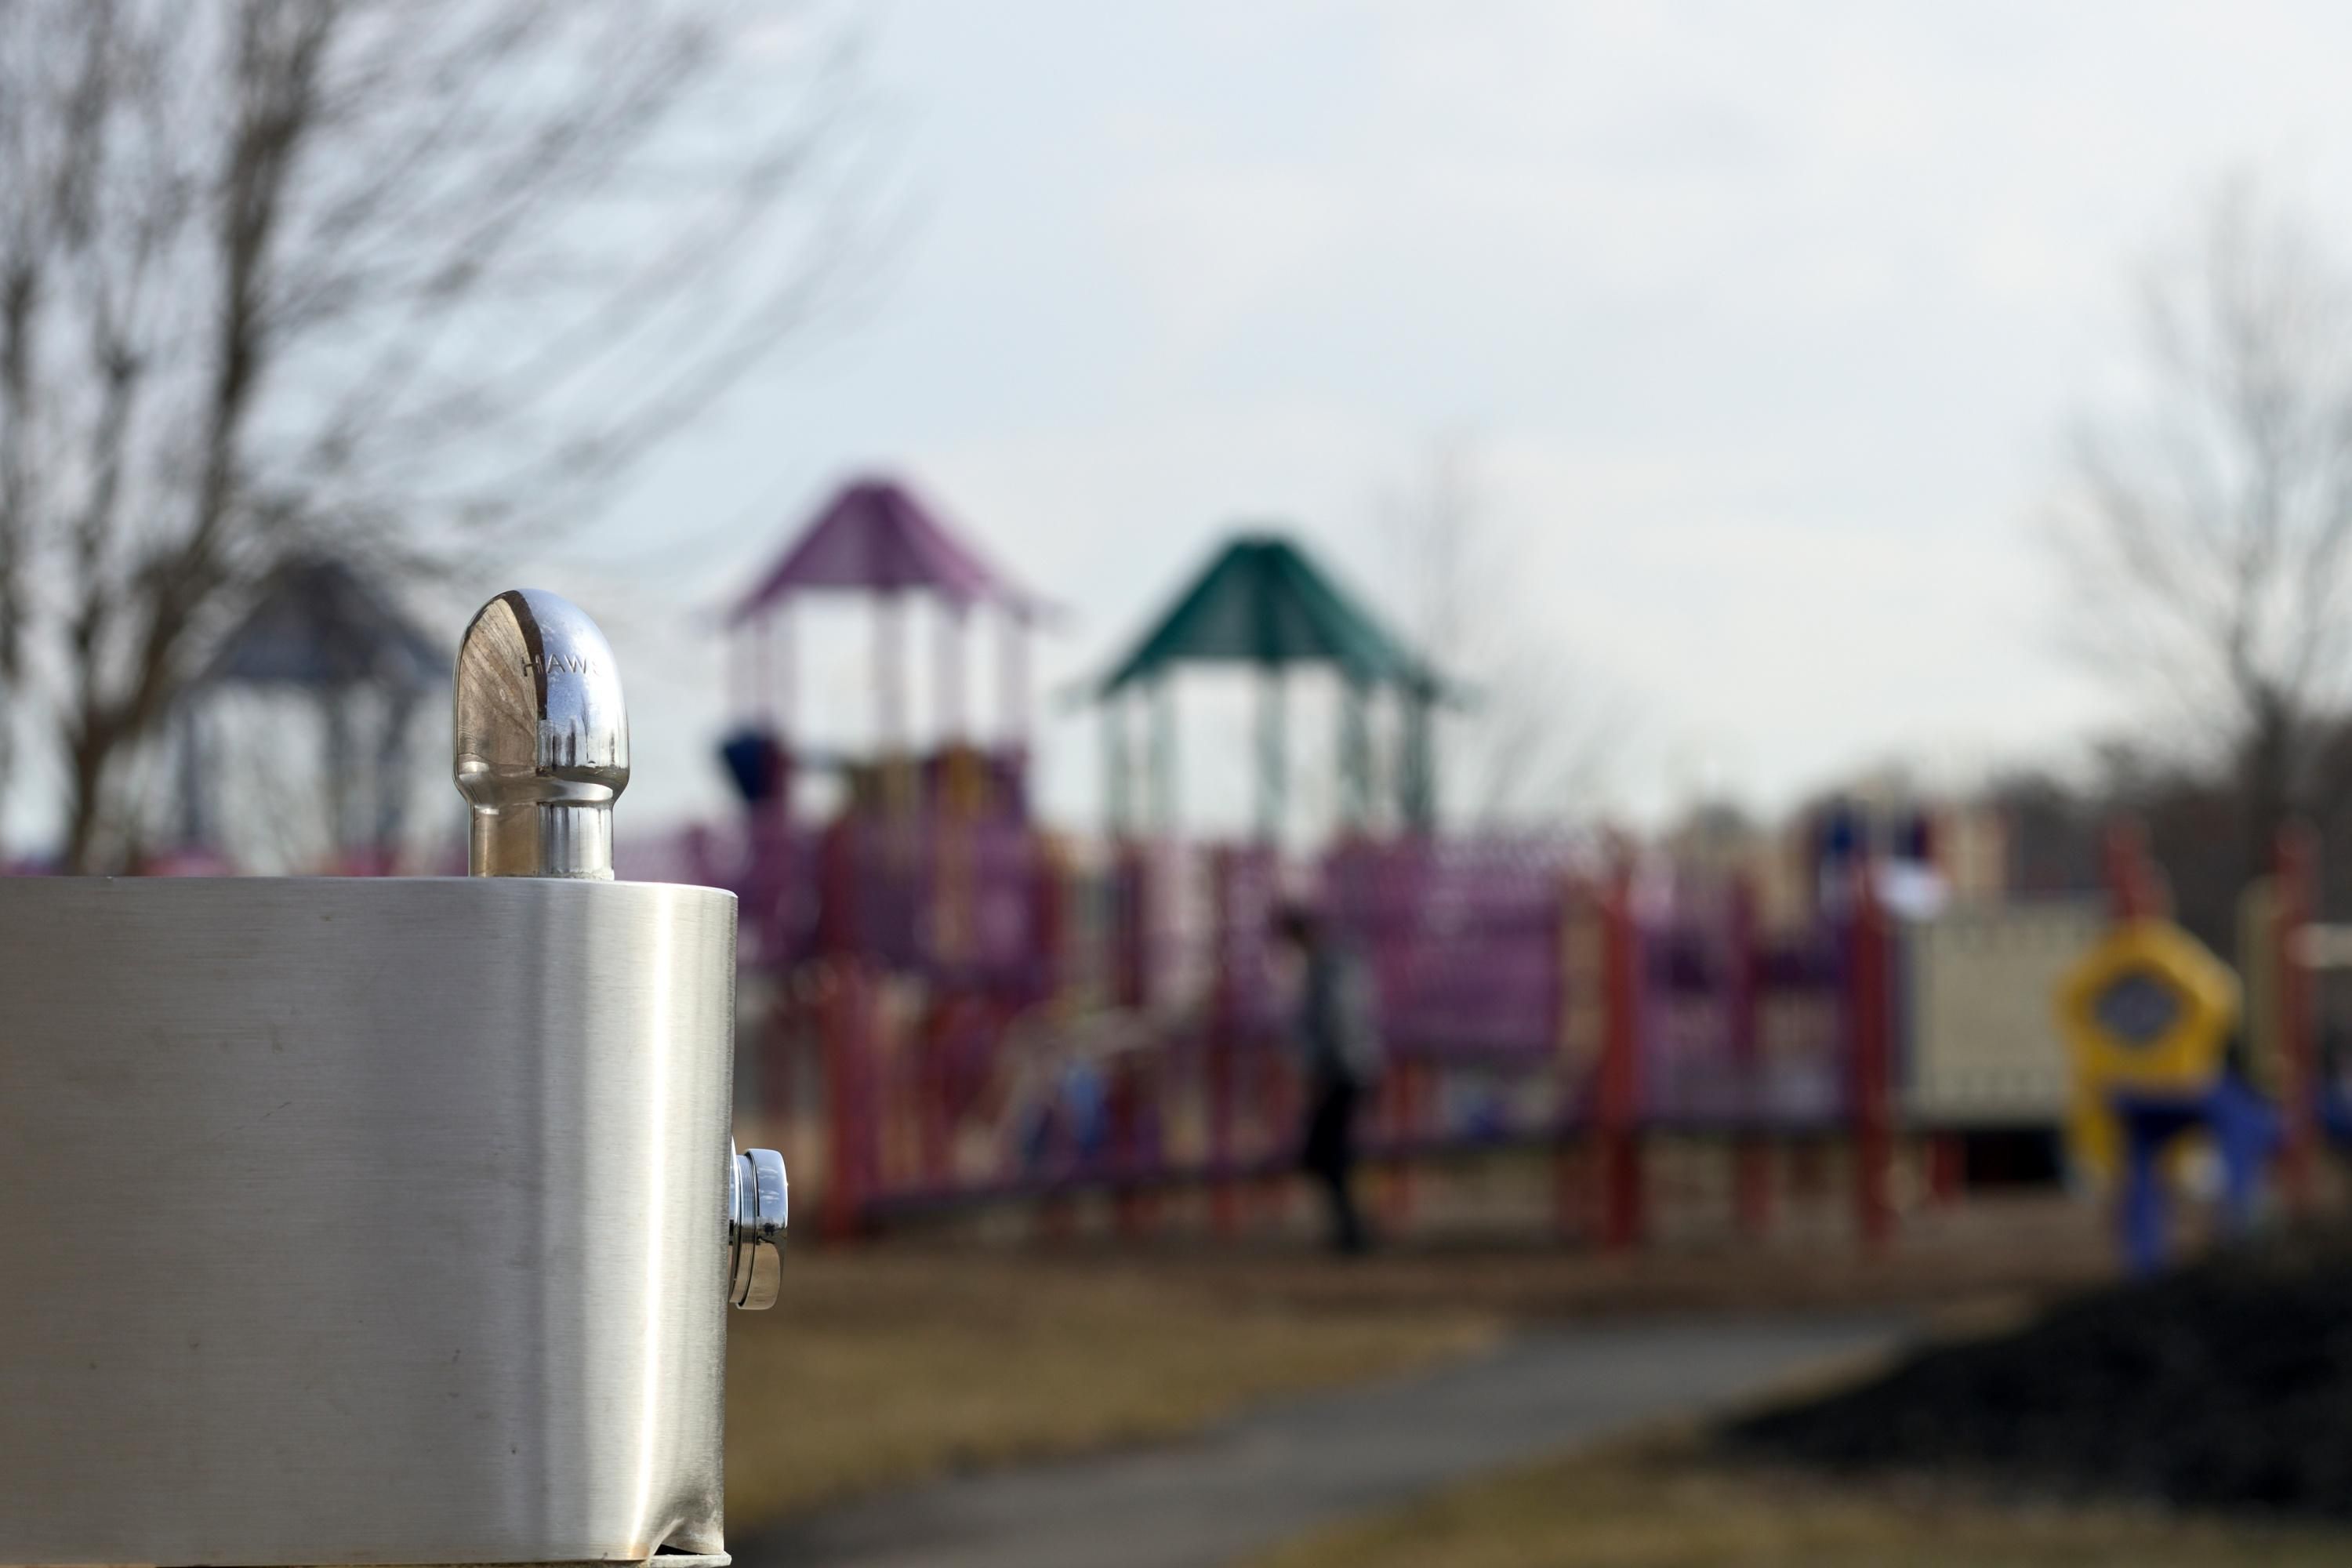 Playground with water fountain in foreground